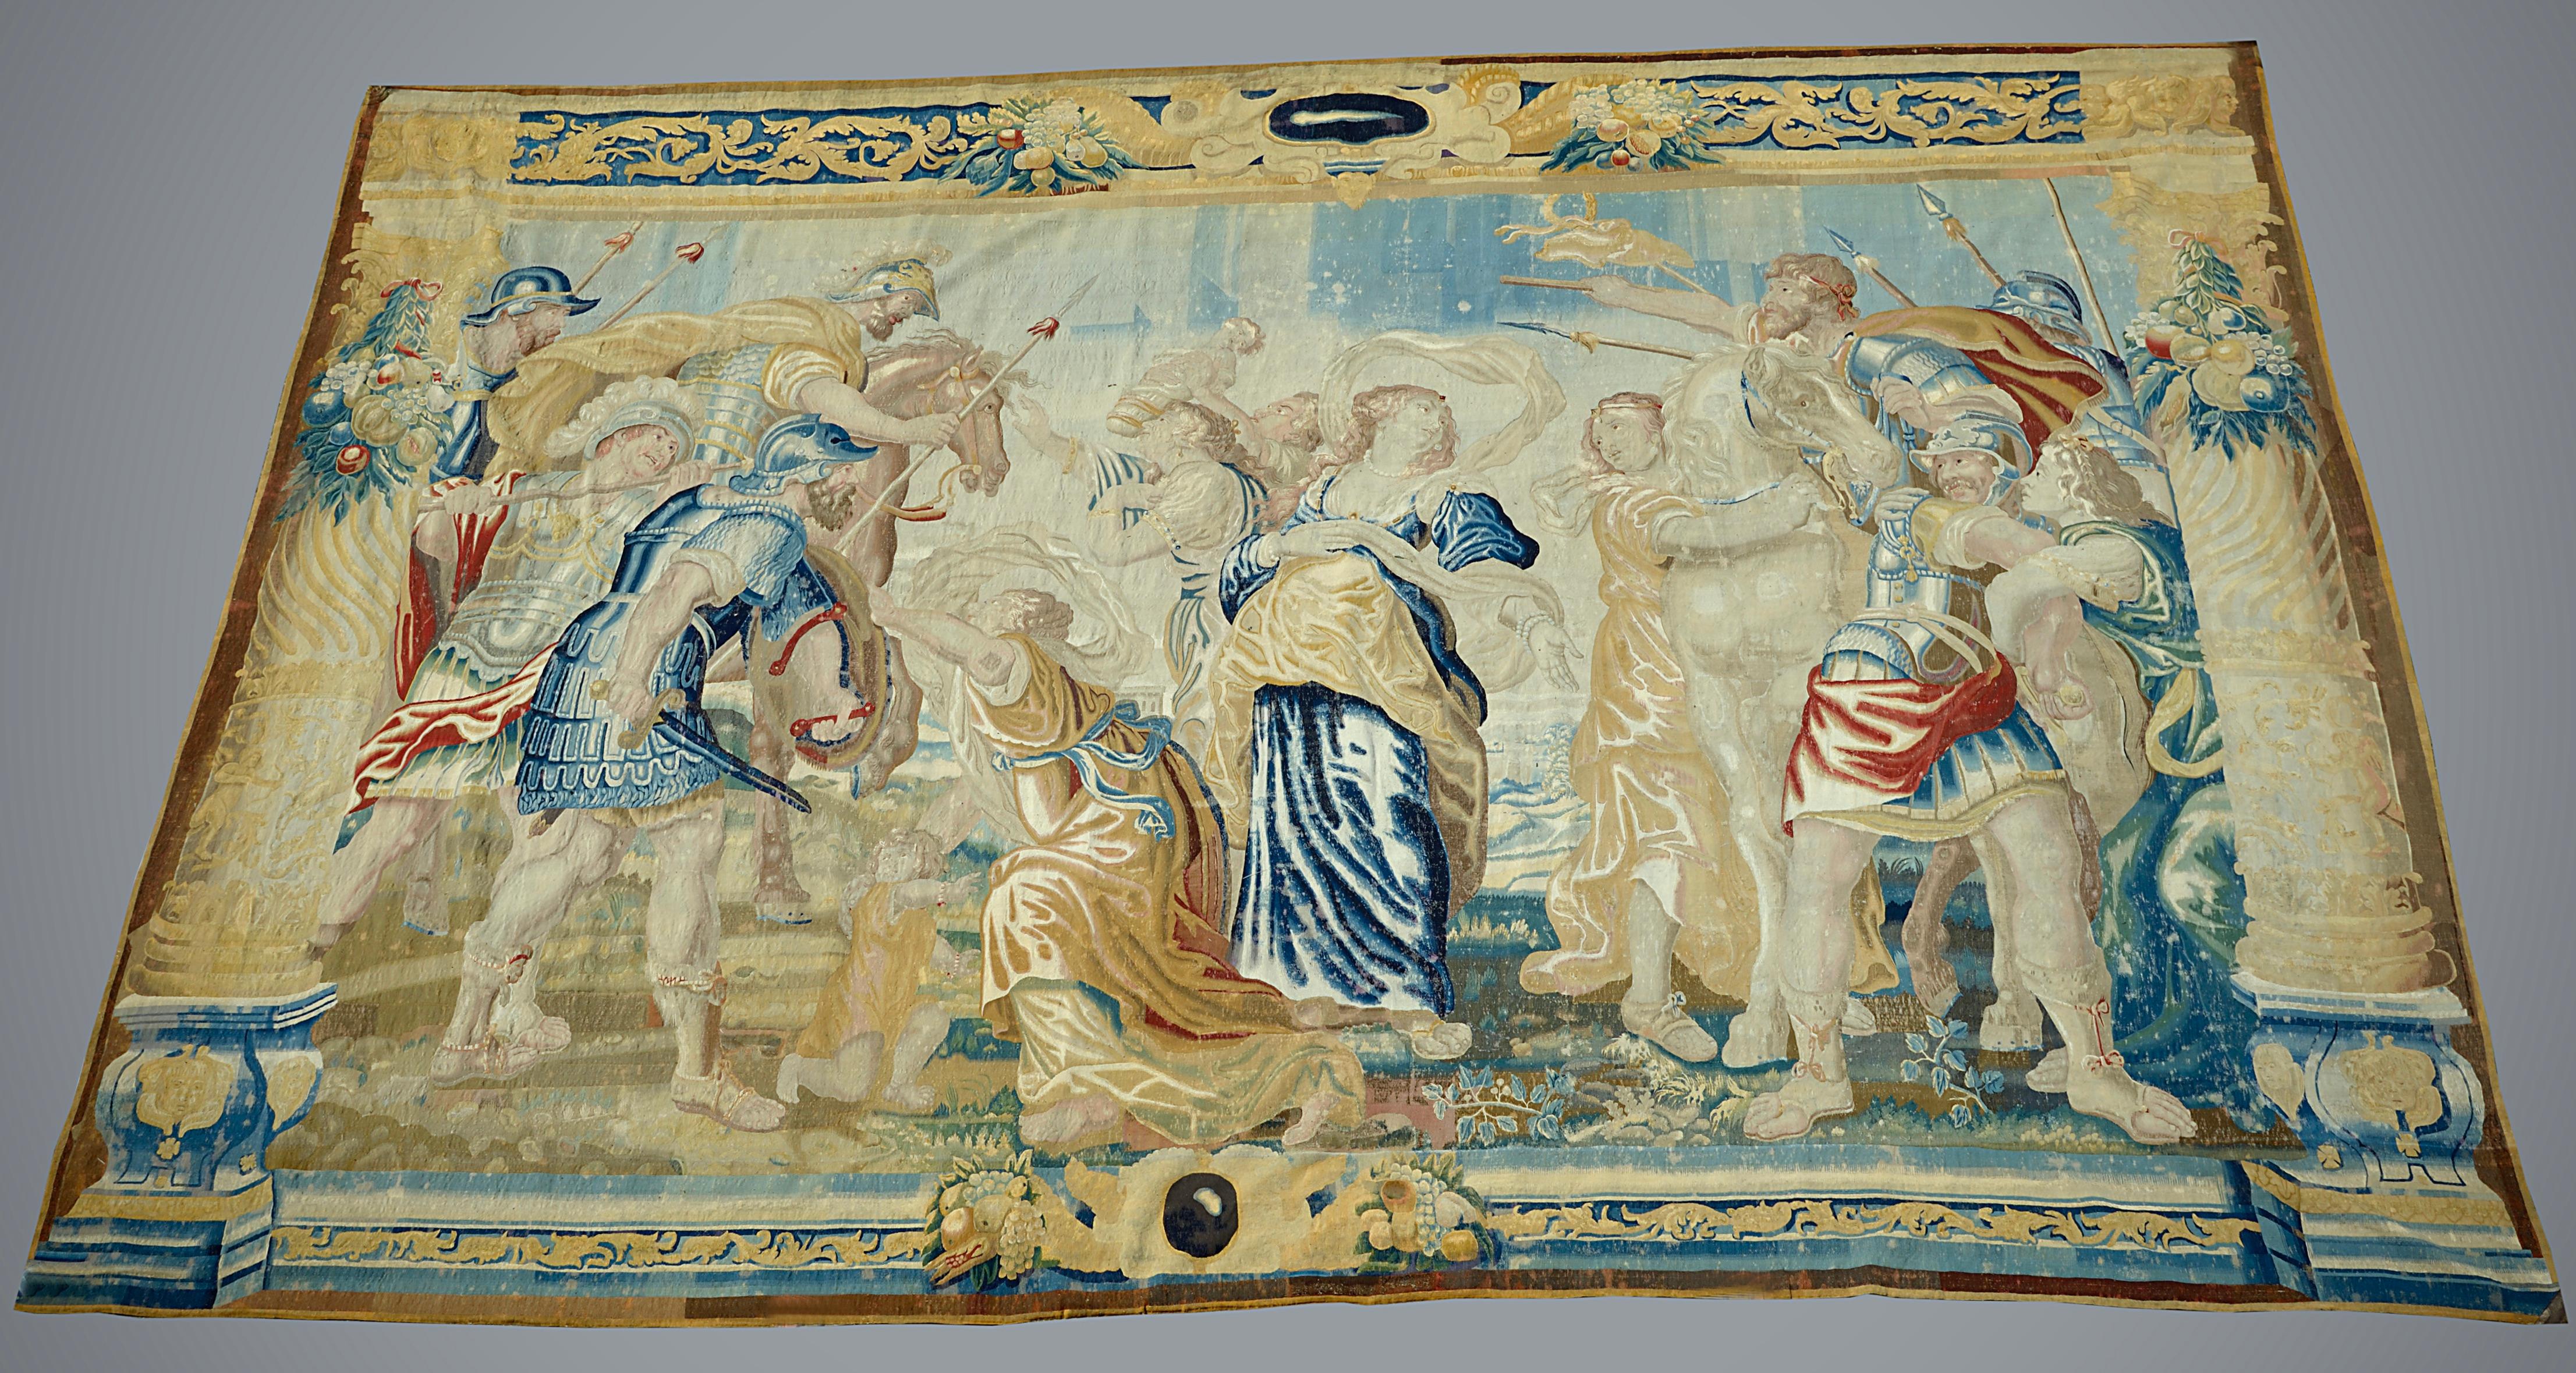 A magnificent Flemish historical tapestry after Justus Van Egmont, Brussels, mid 17th century.

Woven in wools and silks, depicting The Sabine Women Establishing Peace between the Sabines and the Romans from Livy’s History of Rome, flanked by